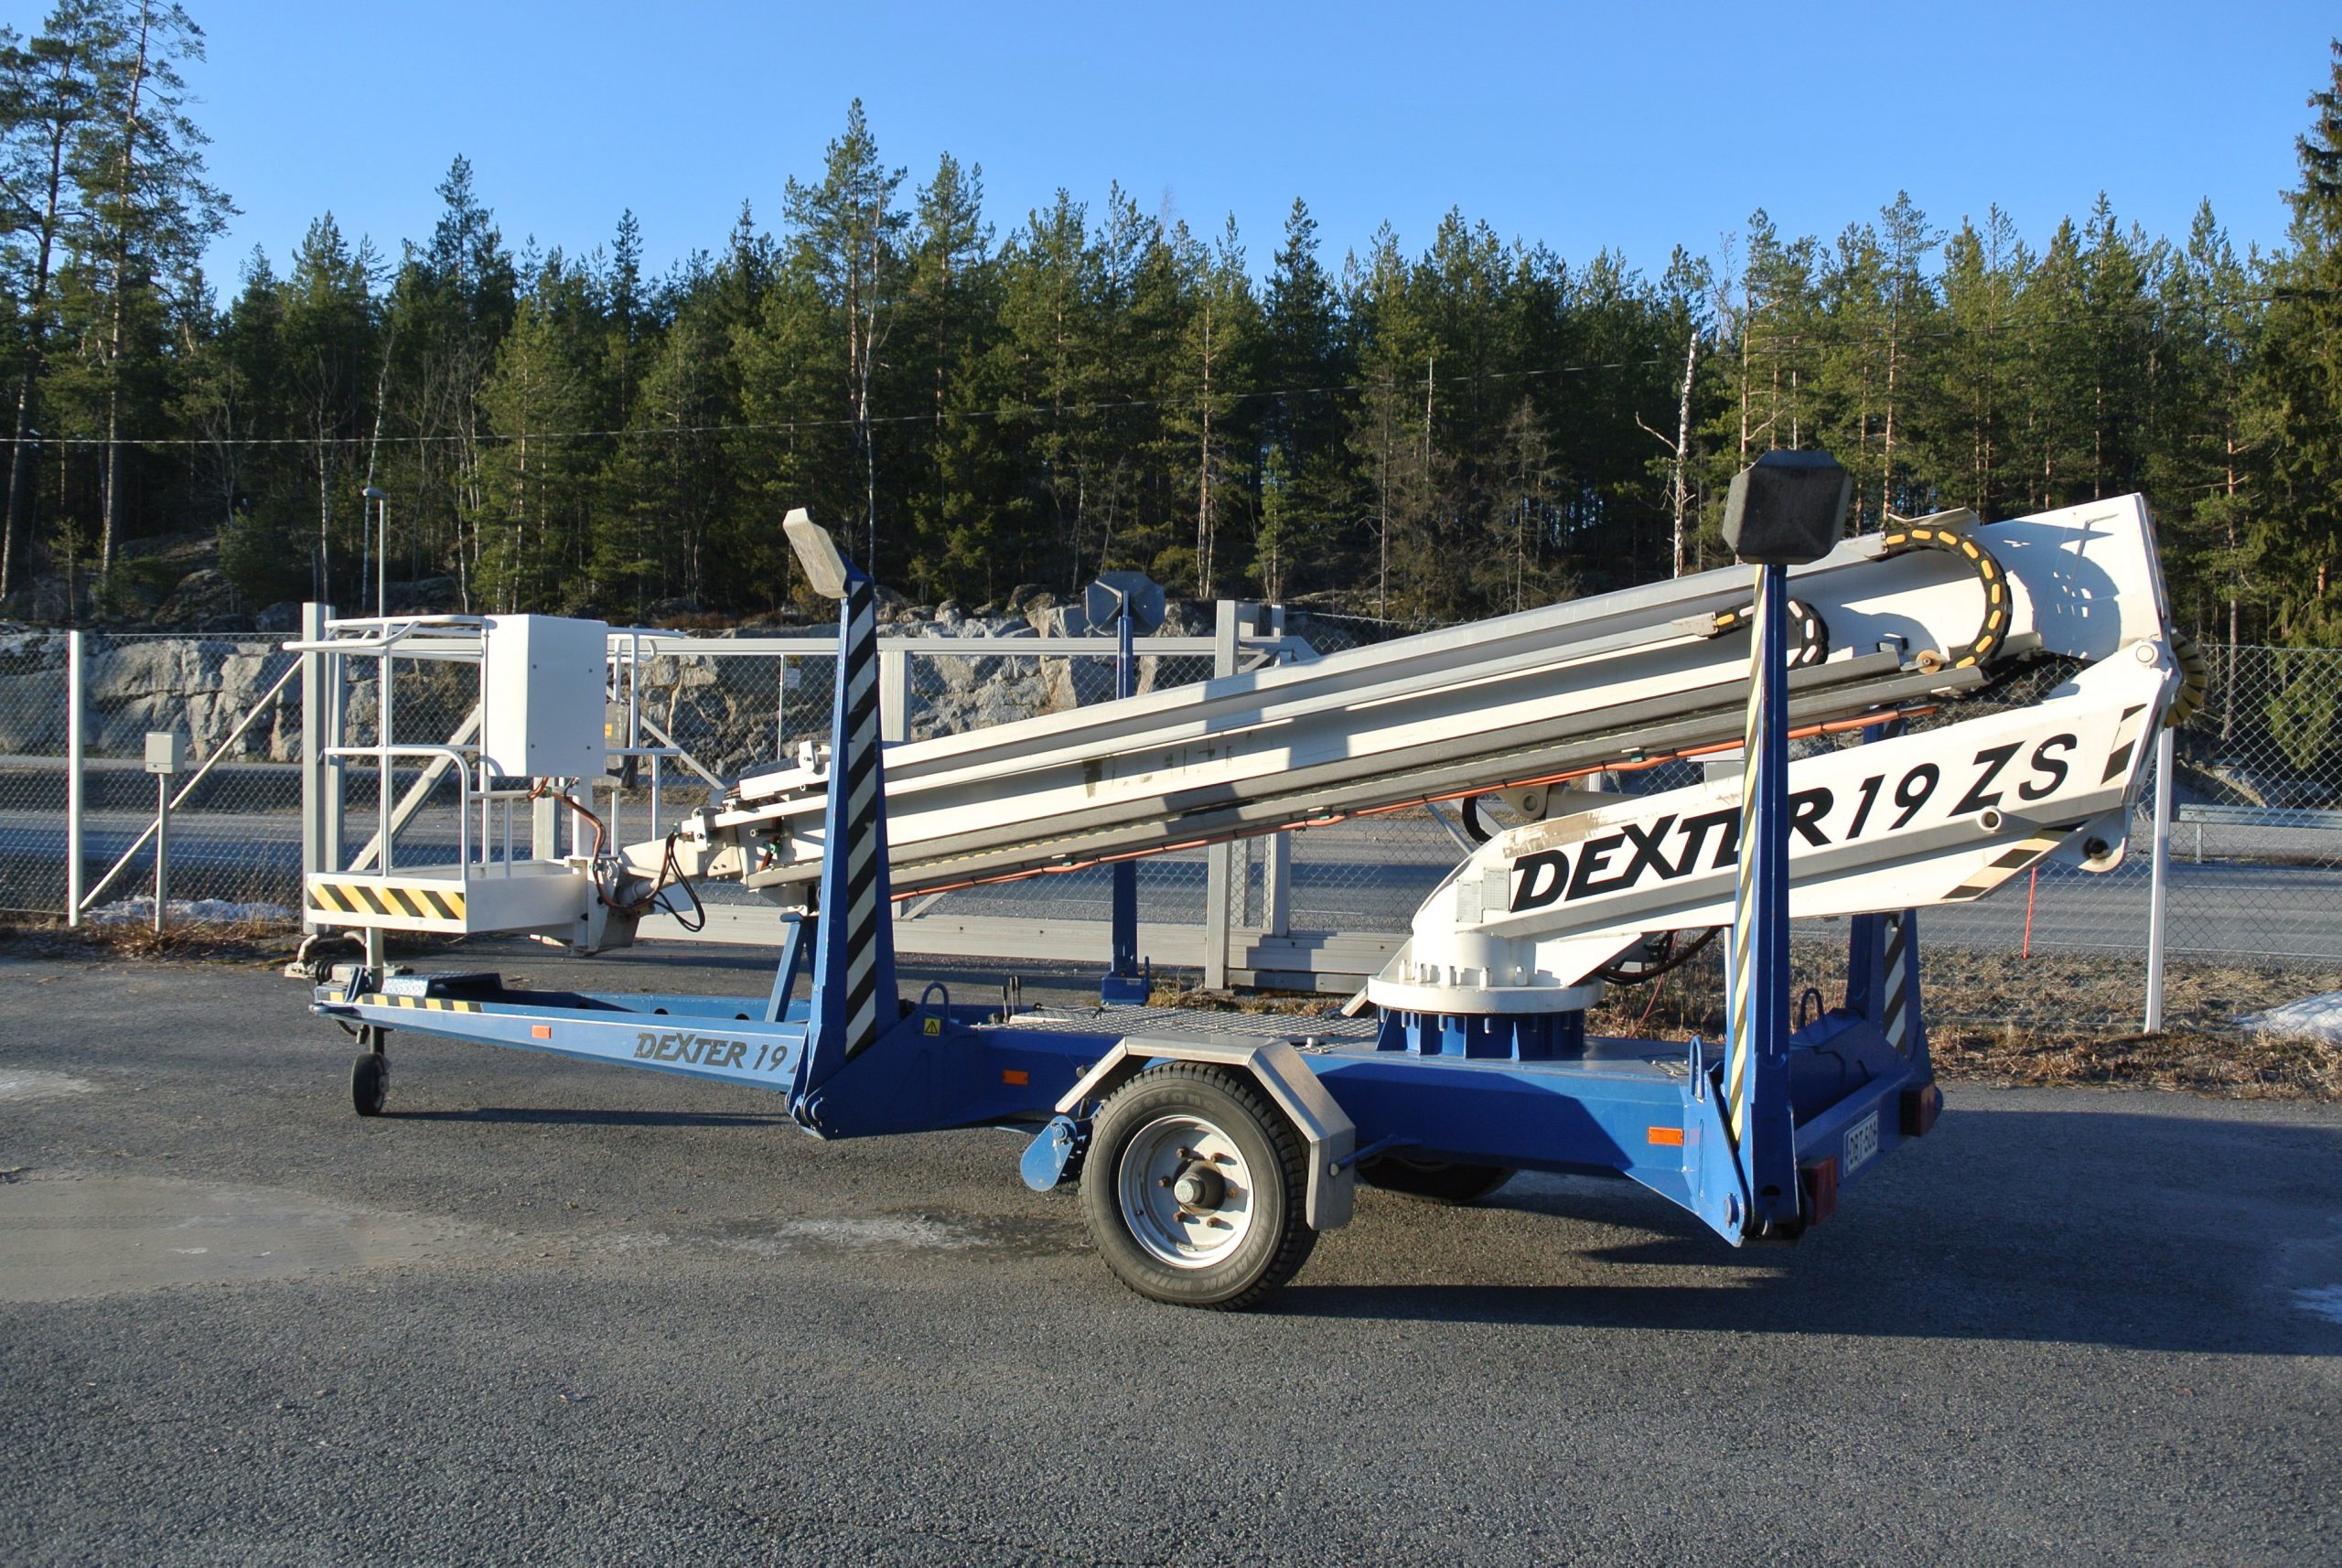 2019 - The company's newest model Dexter 15 ZA articulated boom lift